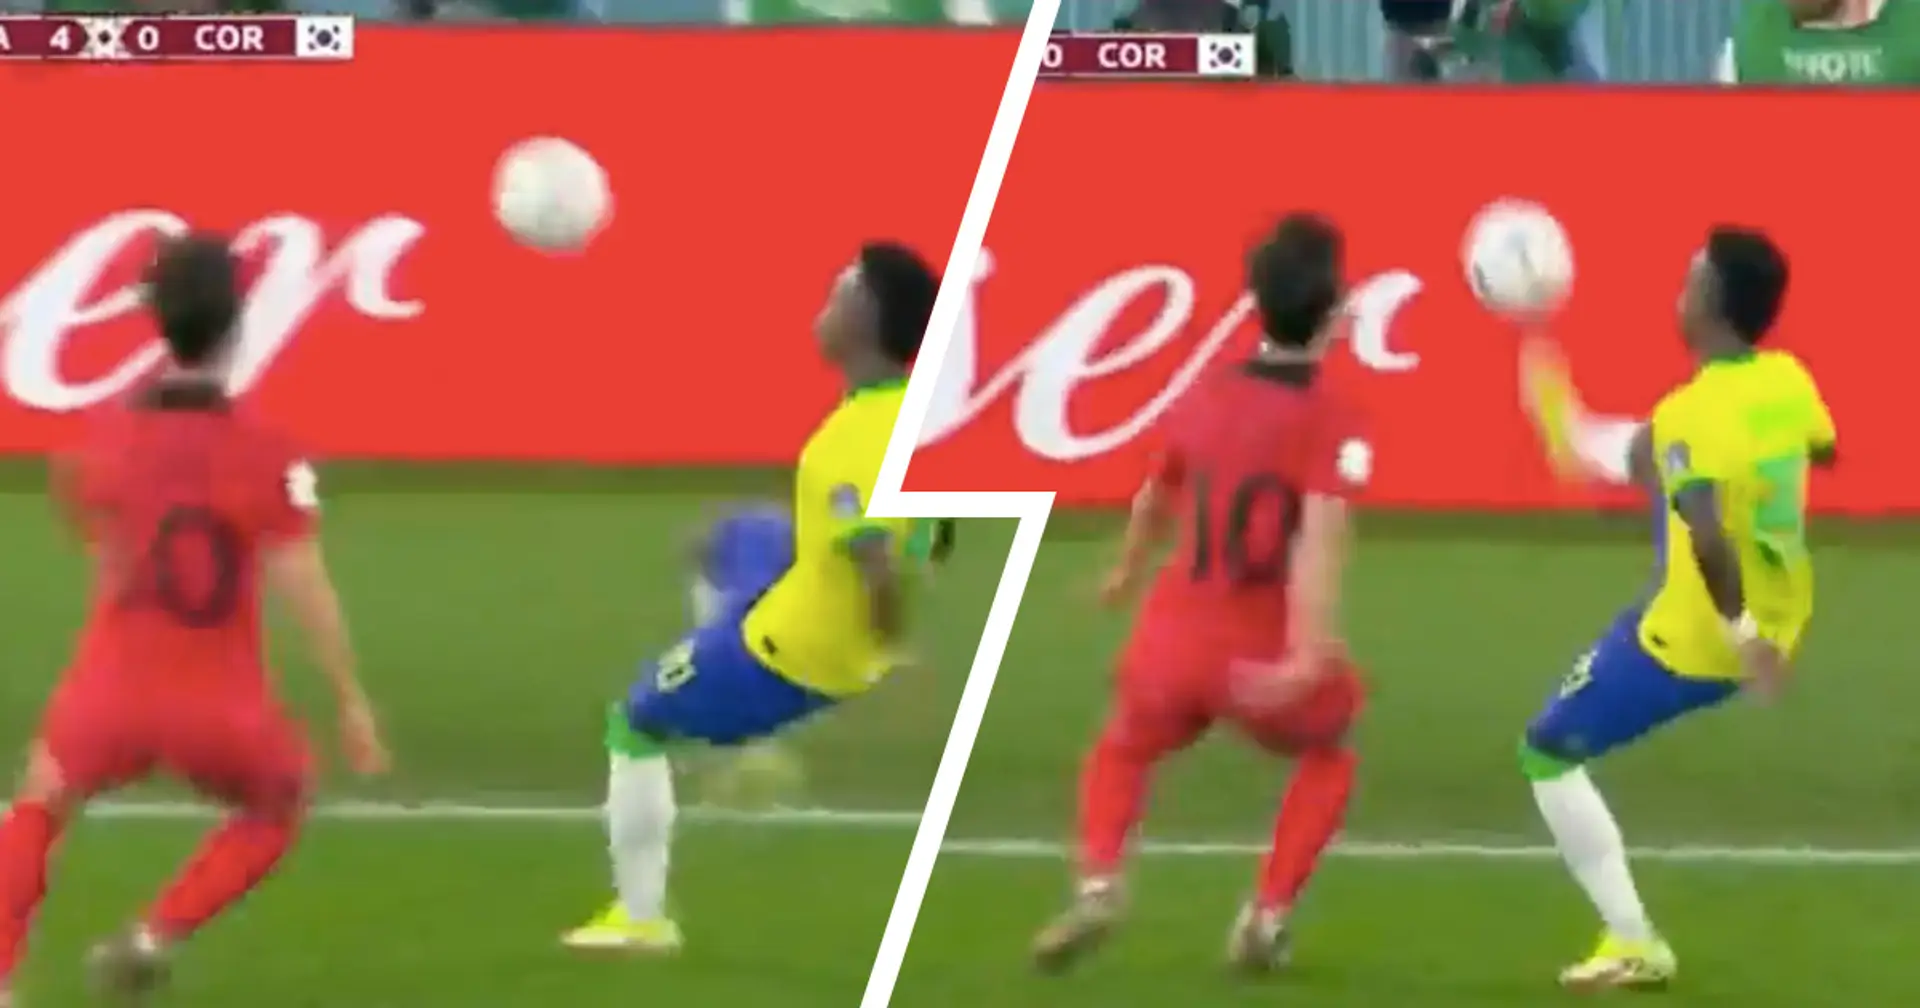 'I wish I was at least 1% as cool as him': Vinicius' cheeky skill in World Cup last 16 goes viral